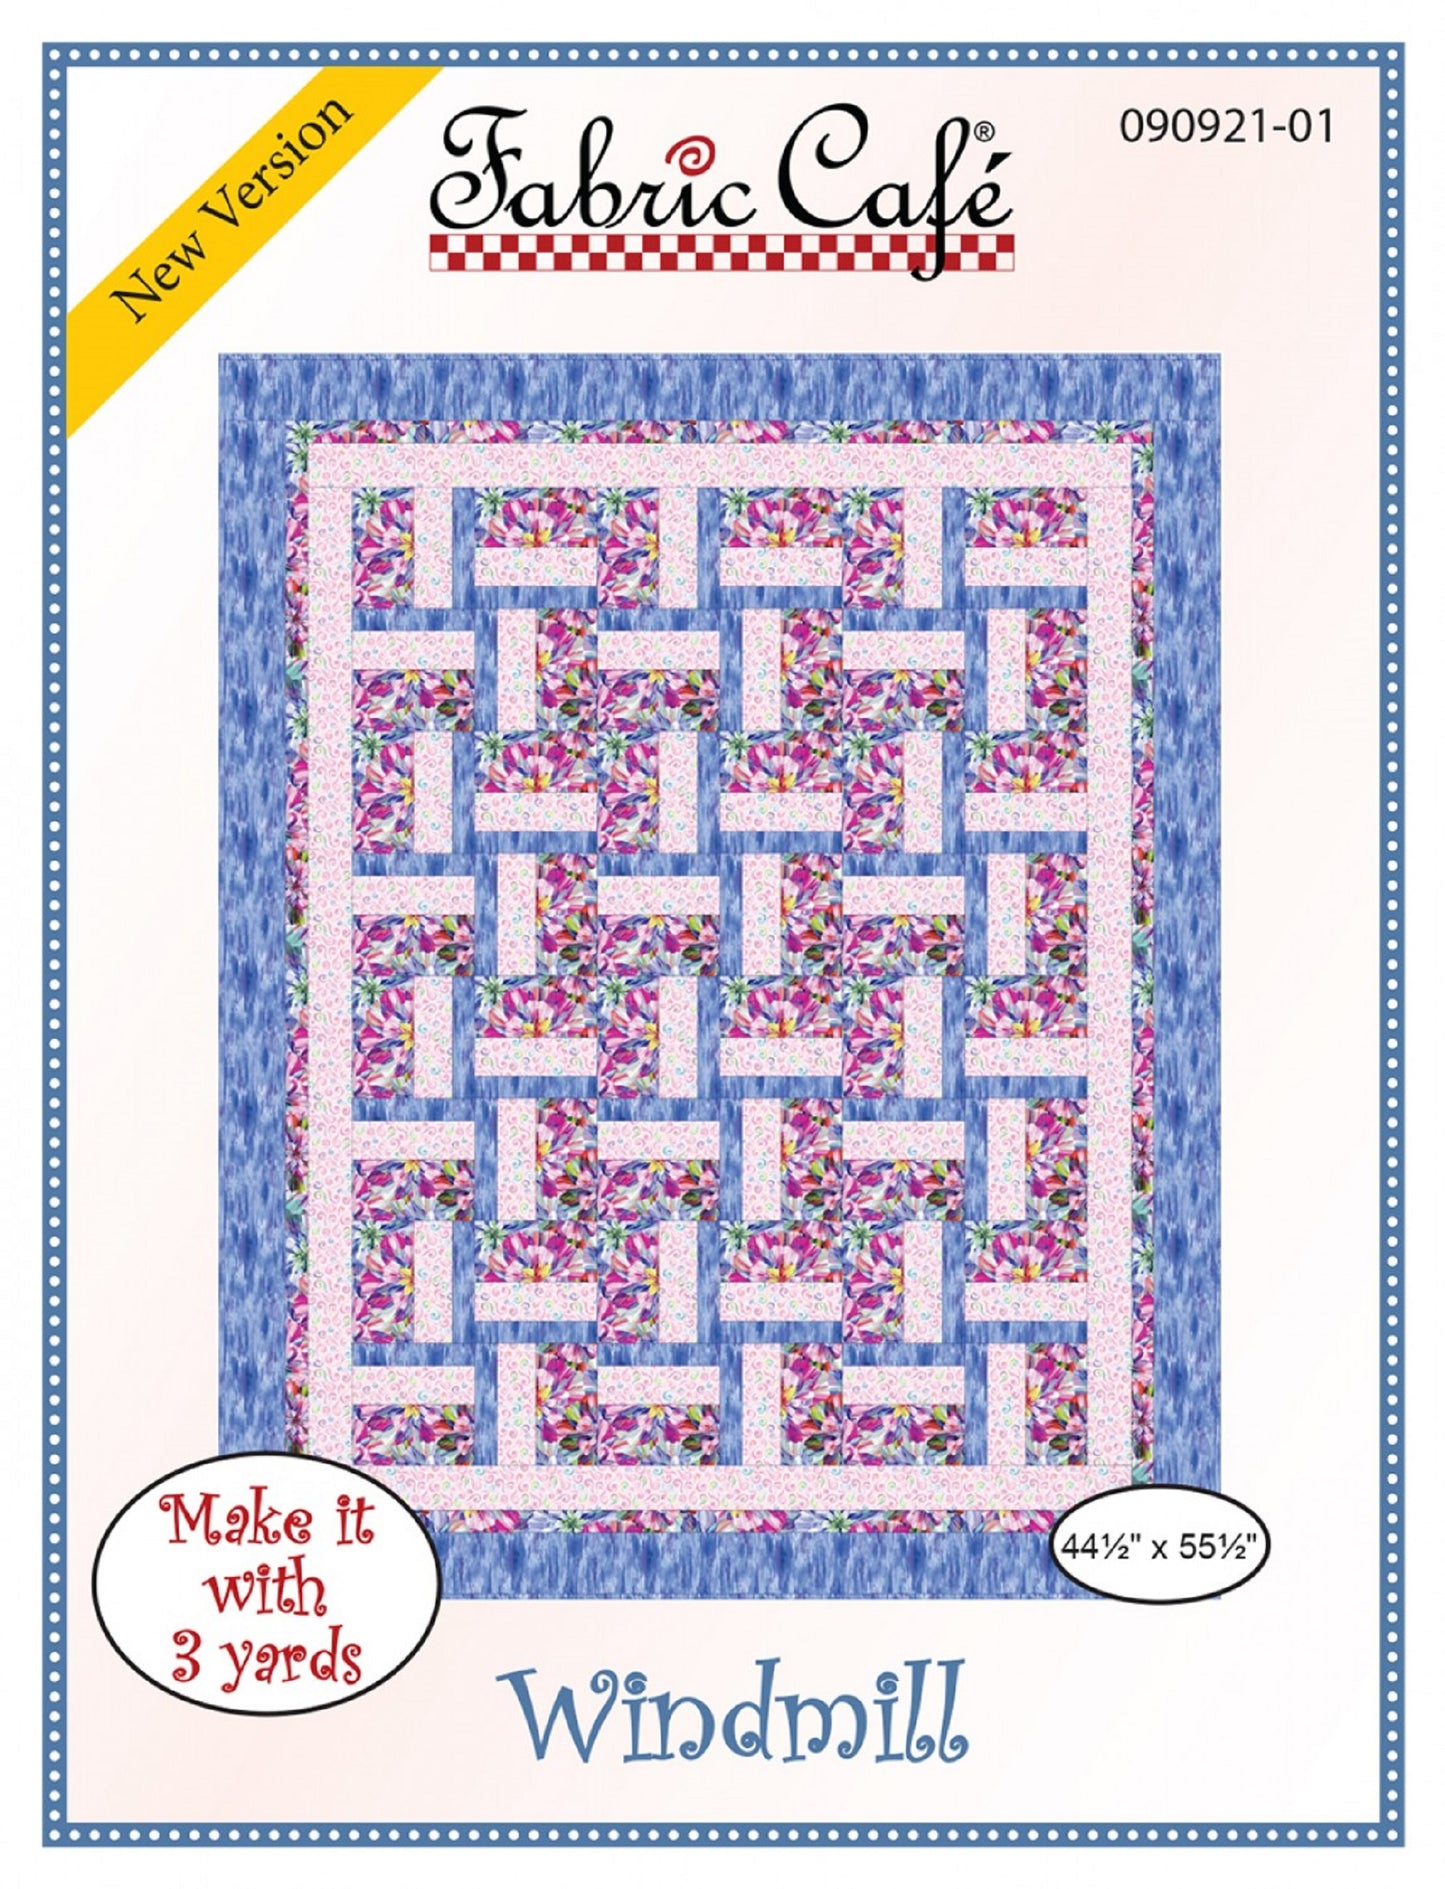 Windmill Quilt Pattern by Fabric Cafe-Make it with 3 Yards